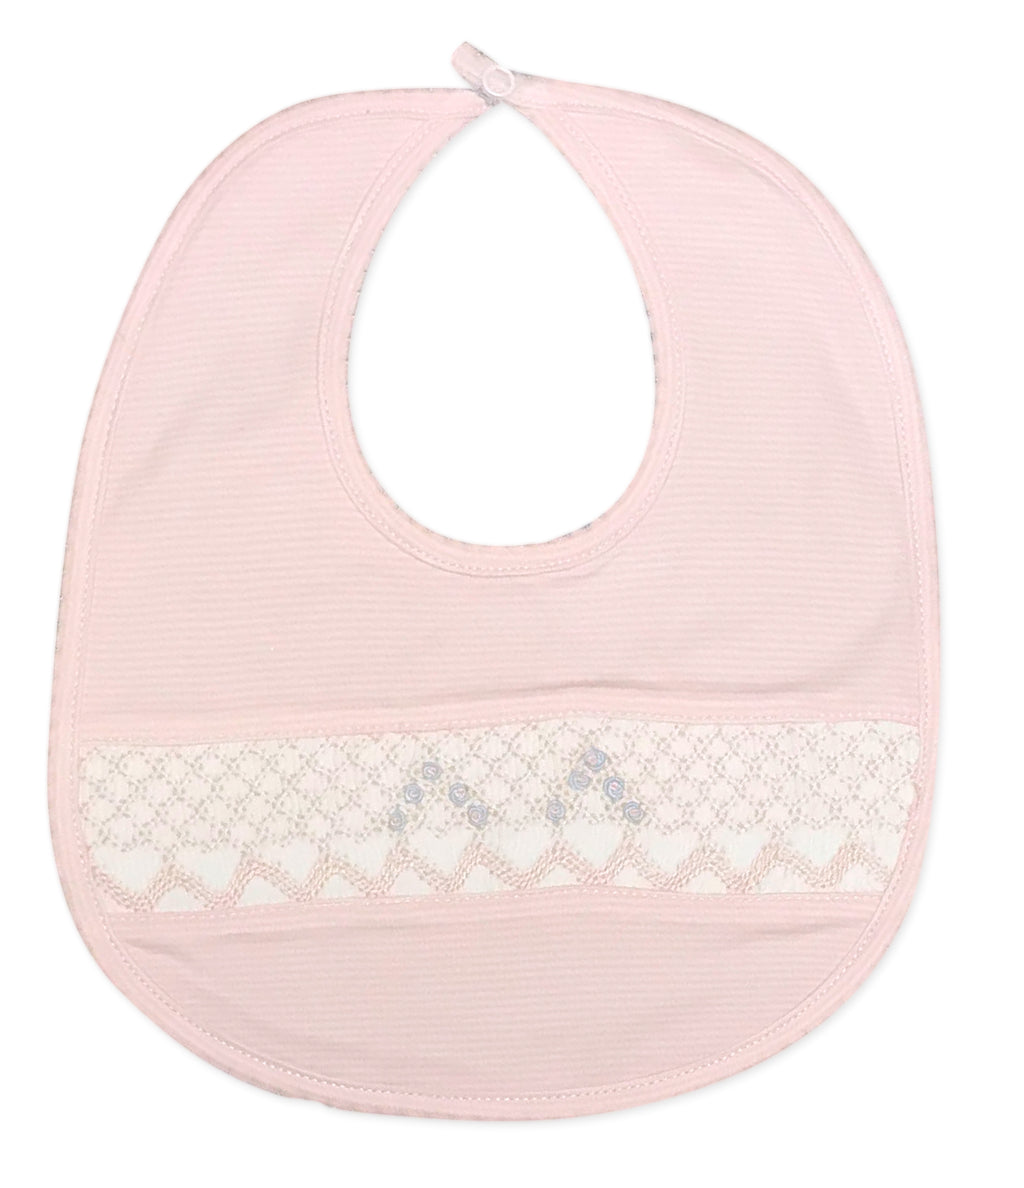 Baby Girl's Pima Cotton Pink And Blue Hand Smocked Bib - Little Threads Inc. Children's Clothing